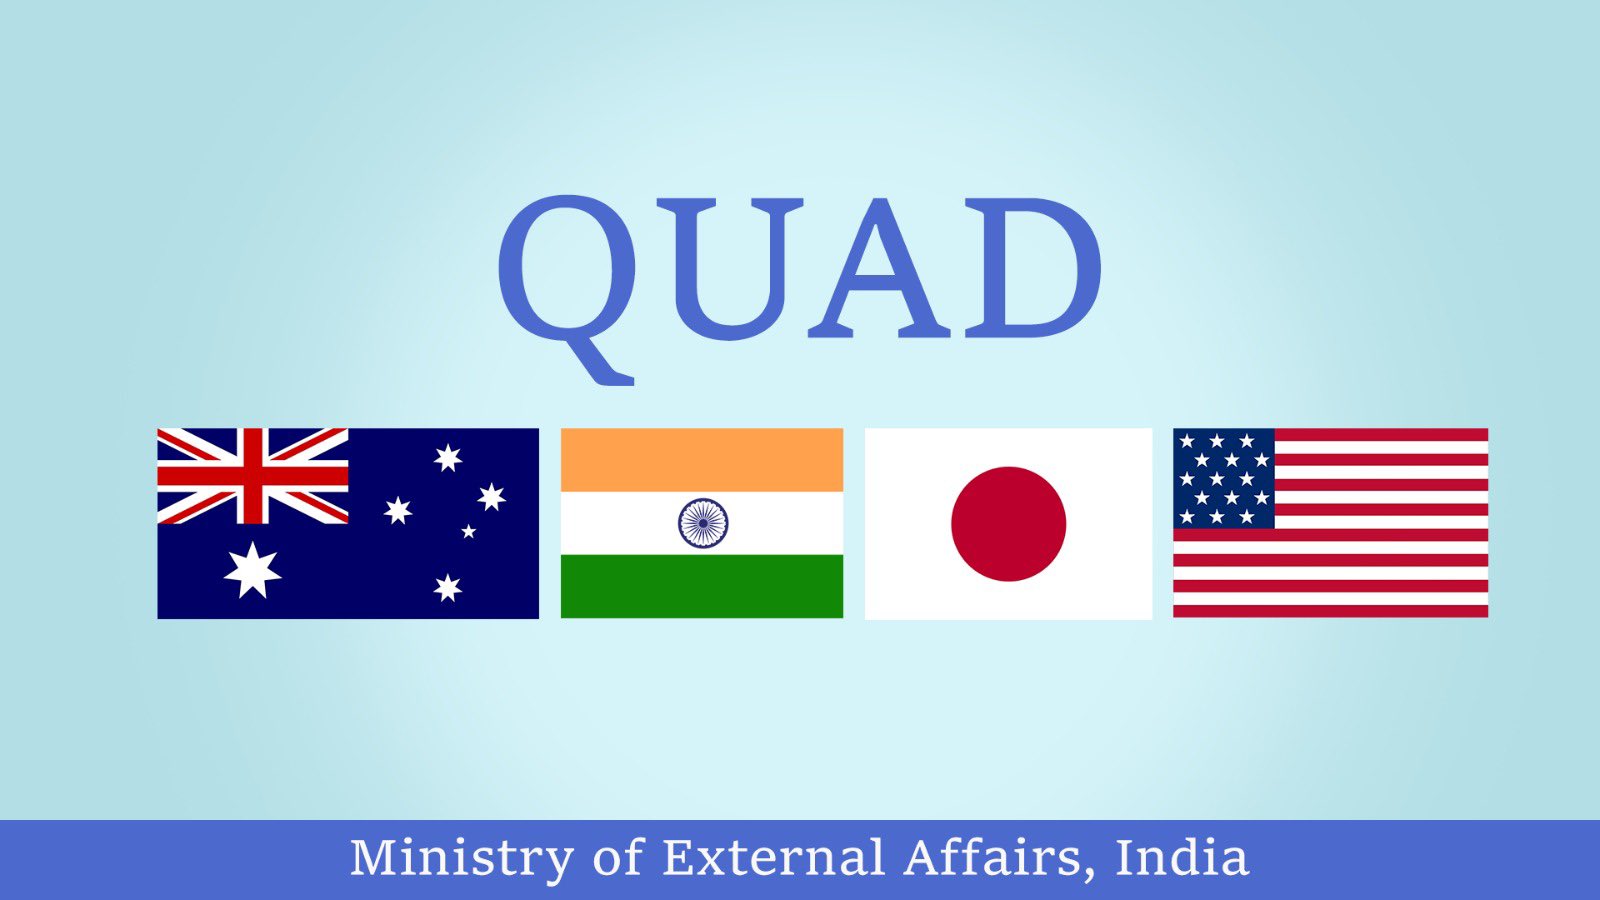 Meeting Of QUAD Senior Officials From India, Australia, Japan & US Held Via Video Conference